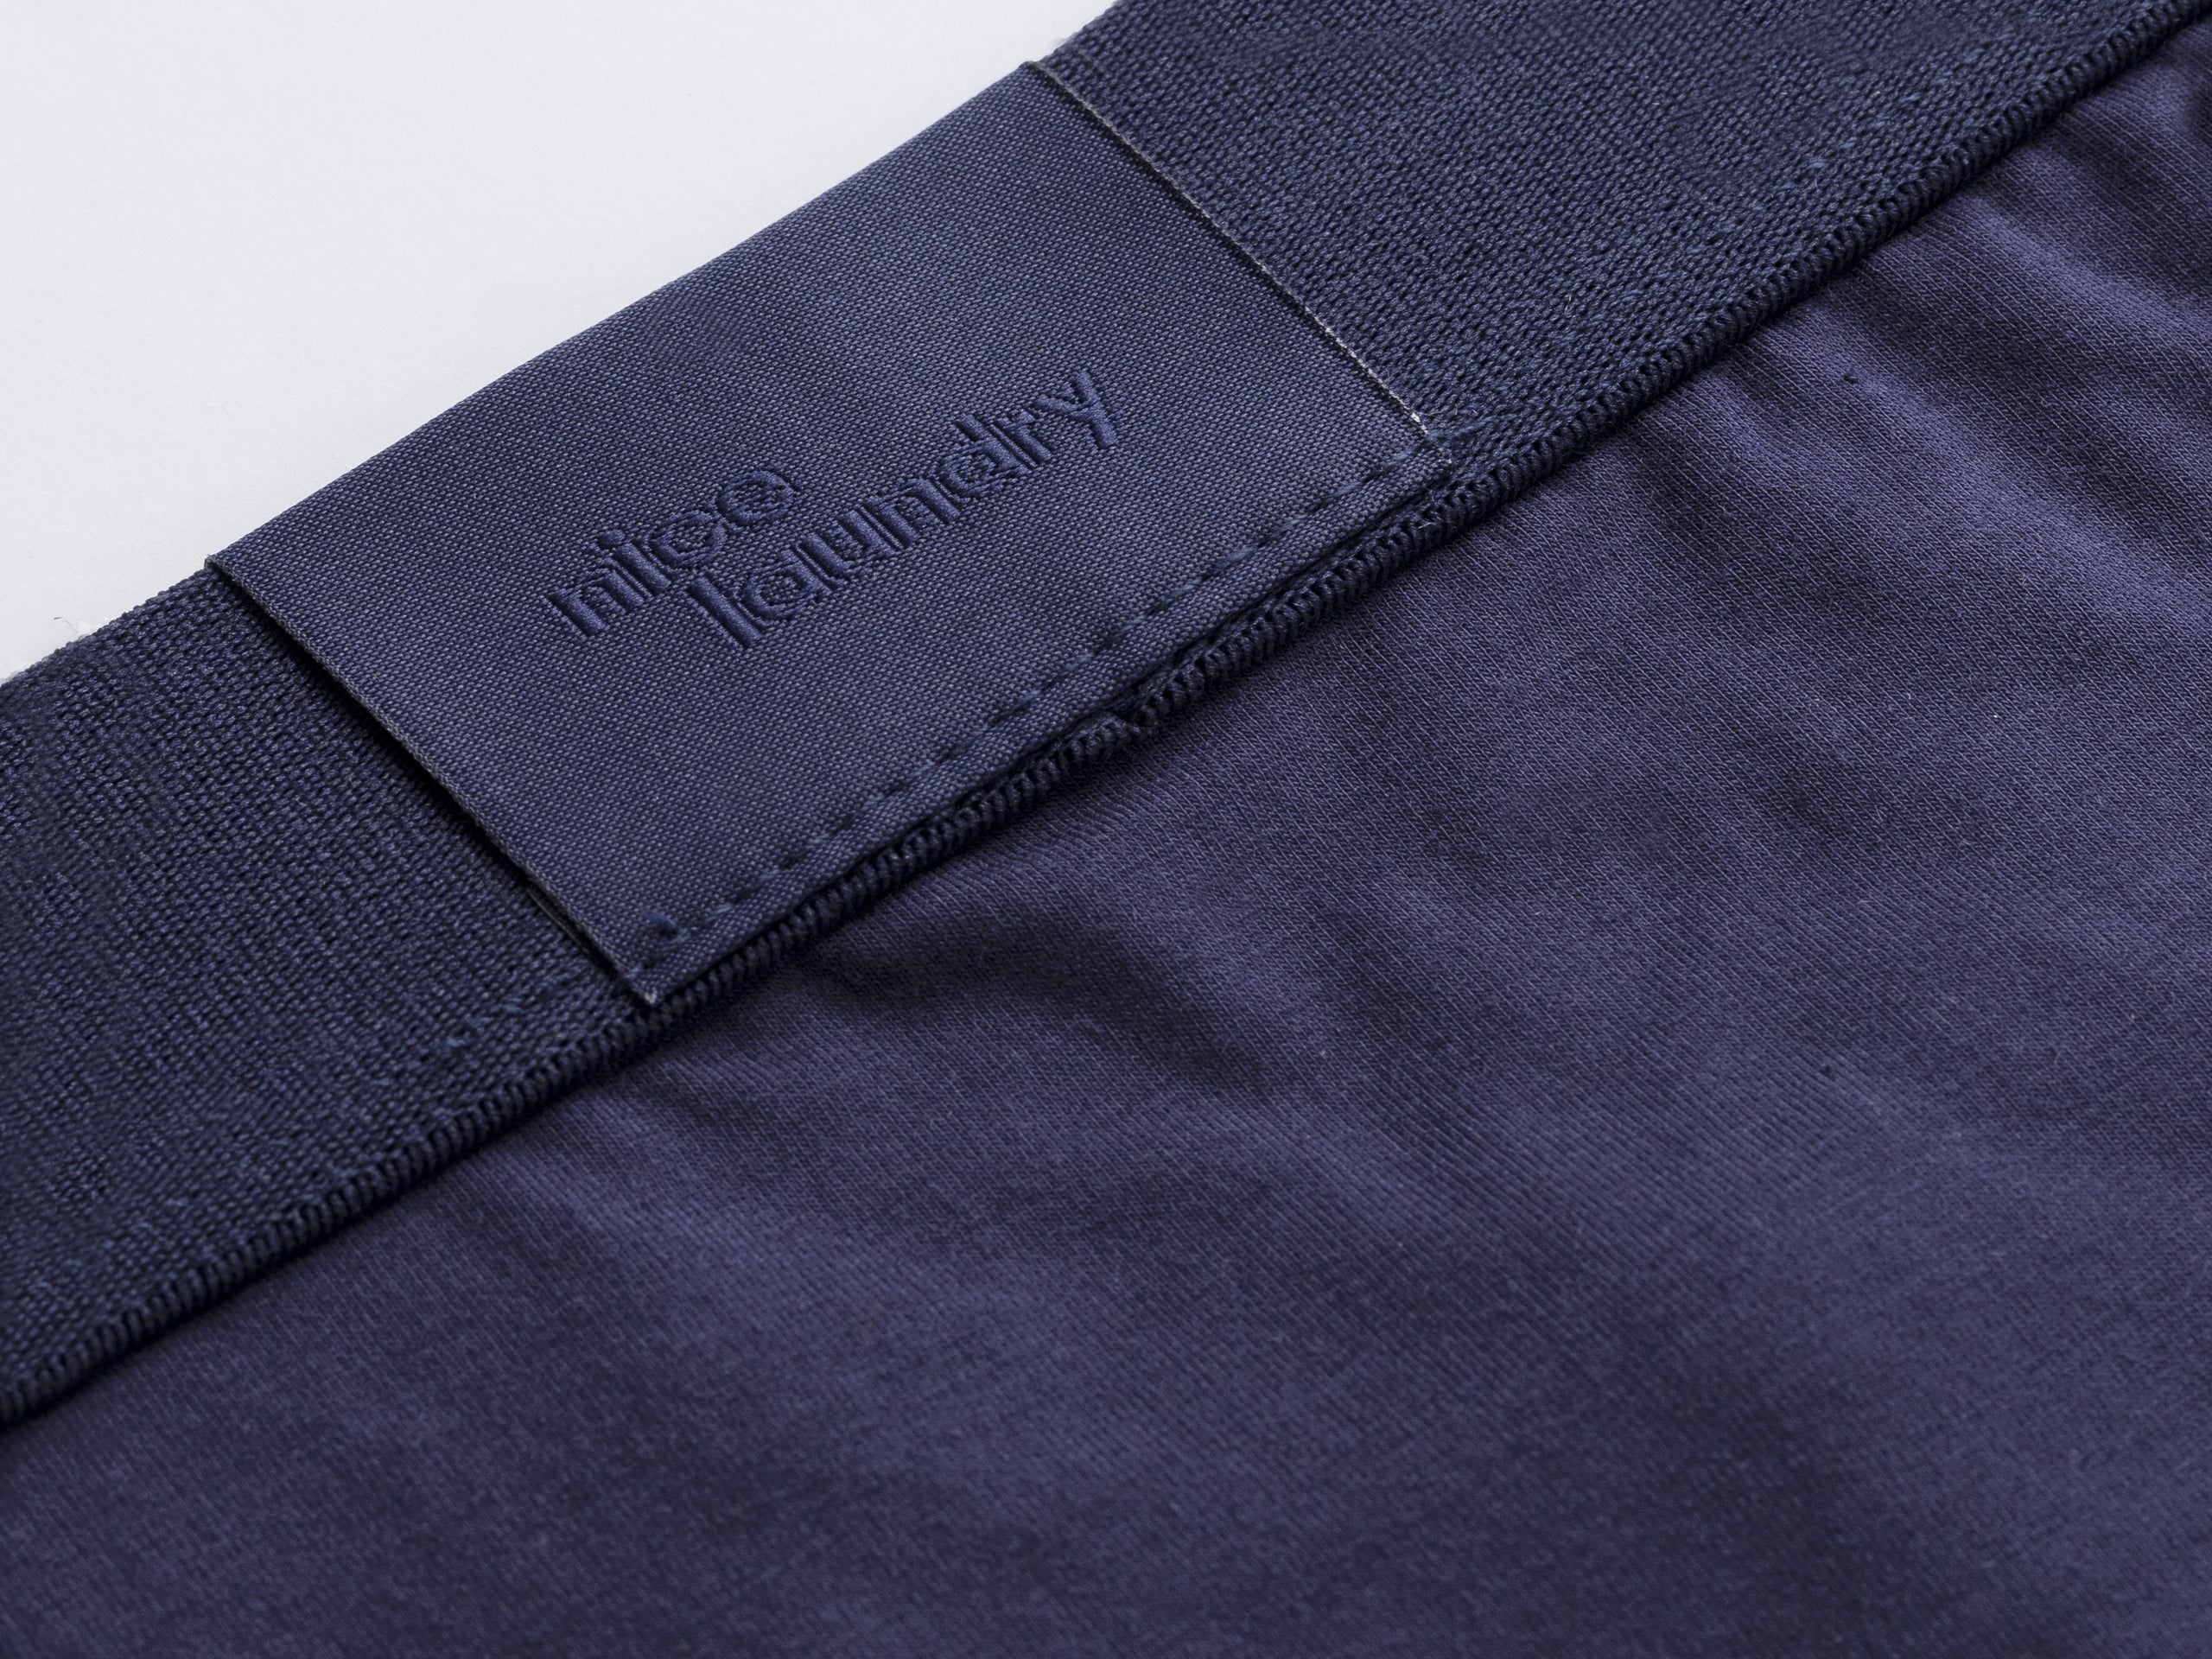 Close up detail shot of back label found on navy blue brief.